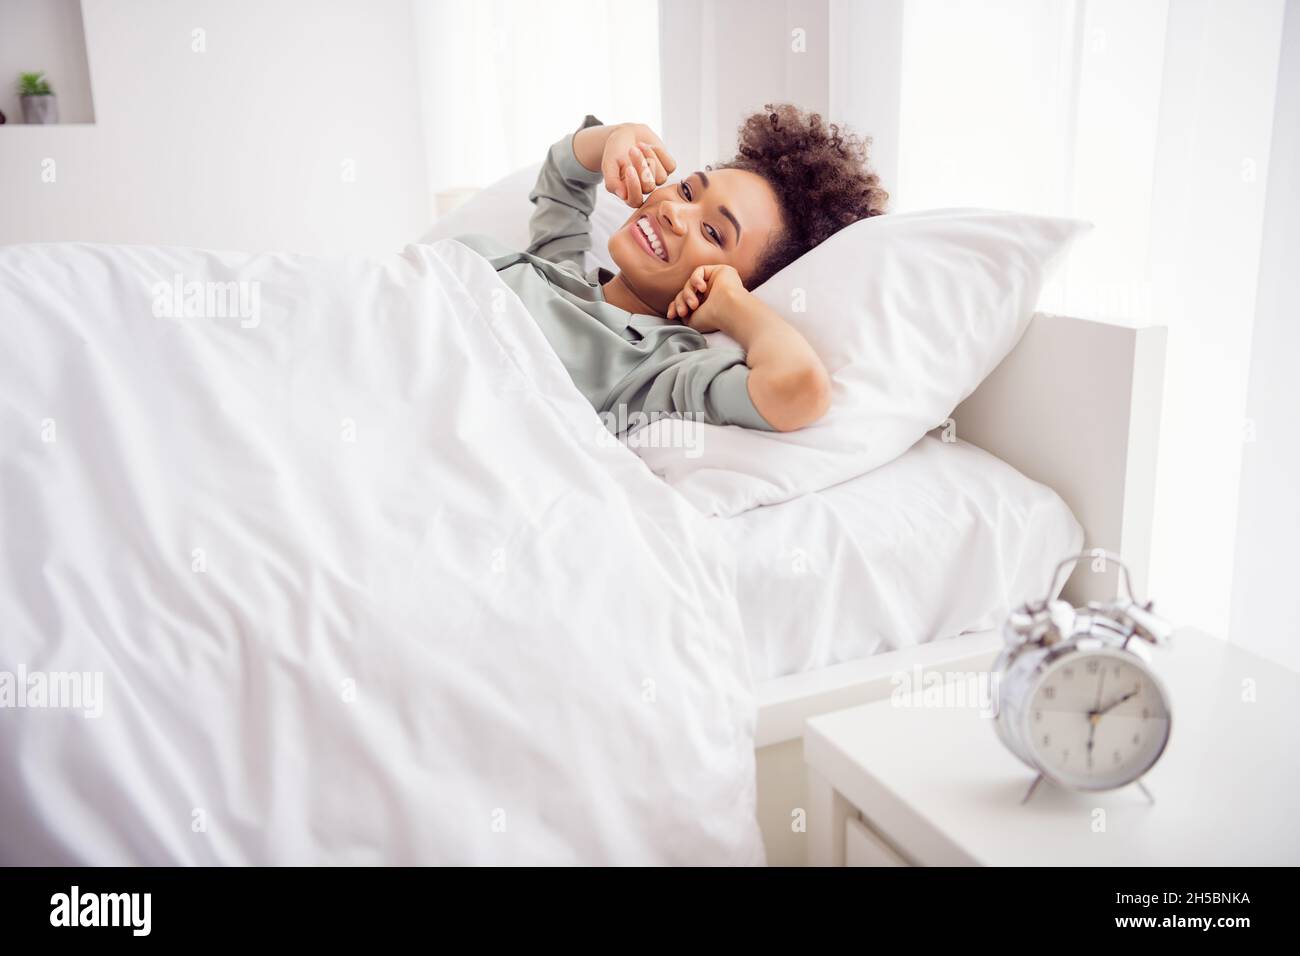 Portrait Of Attractive Cheerful Wavy Haired Girl Lying In Bed Waking Up